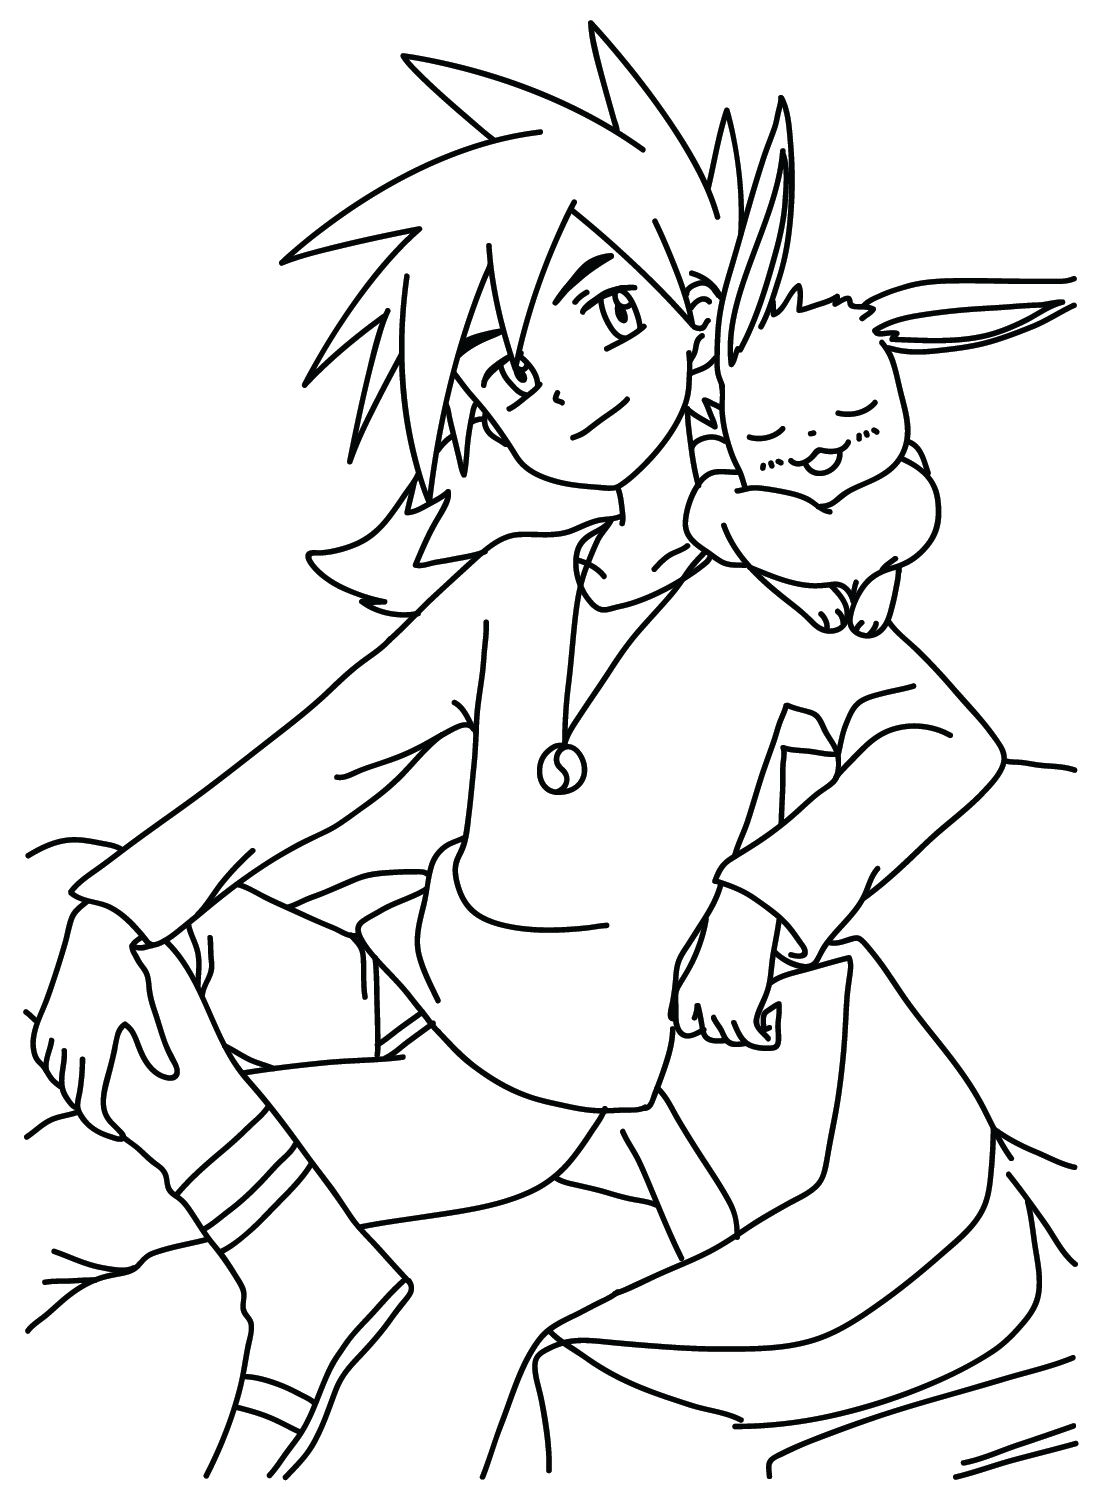 Gary Oak and Eevee Pokemon Pictures to Color from Gary Oak Pokemon